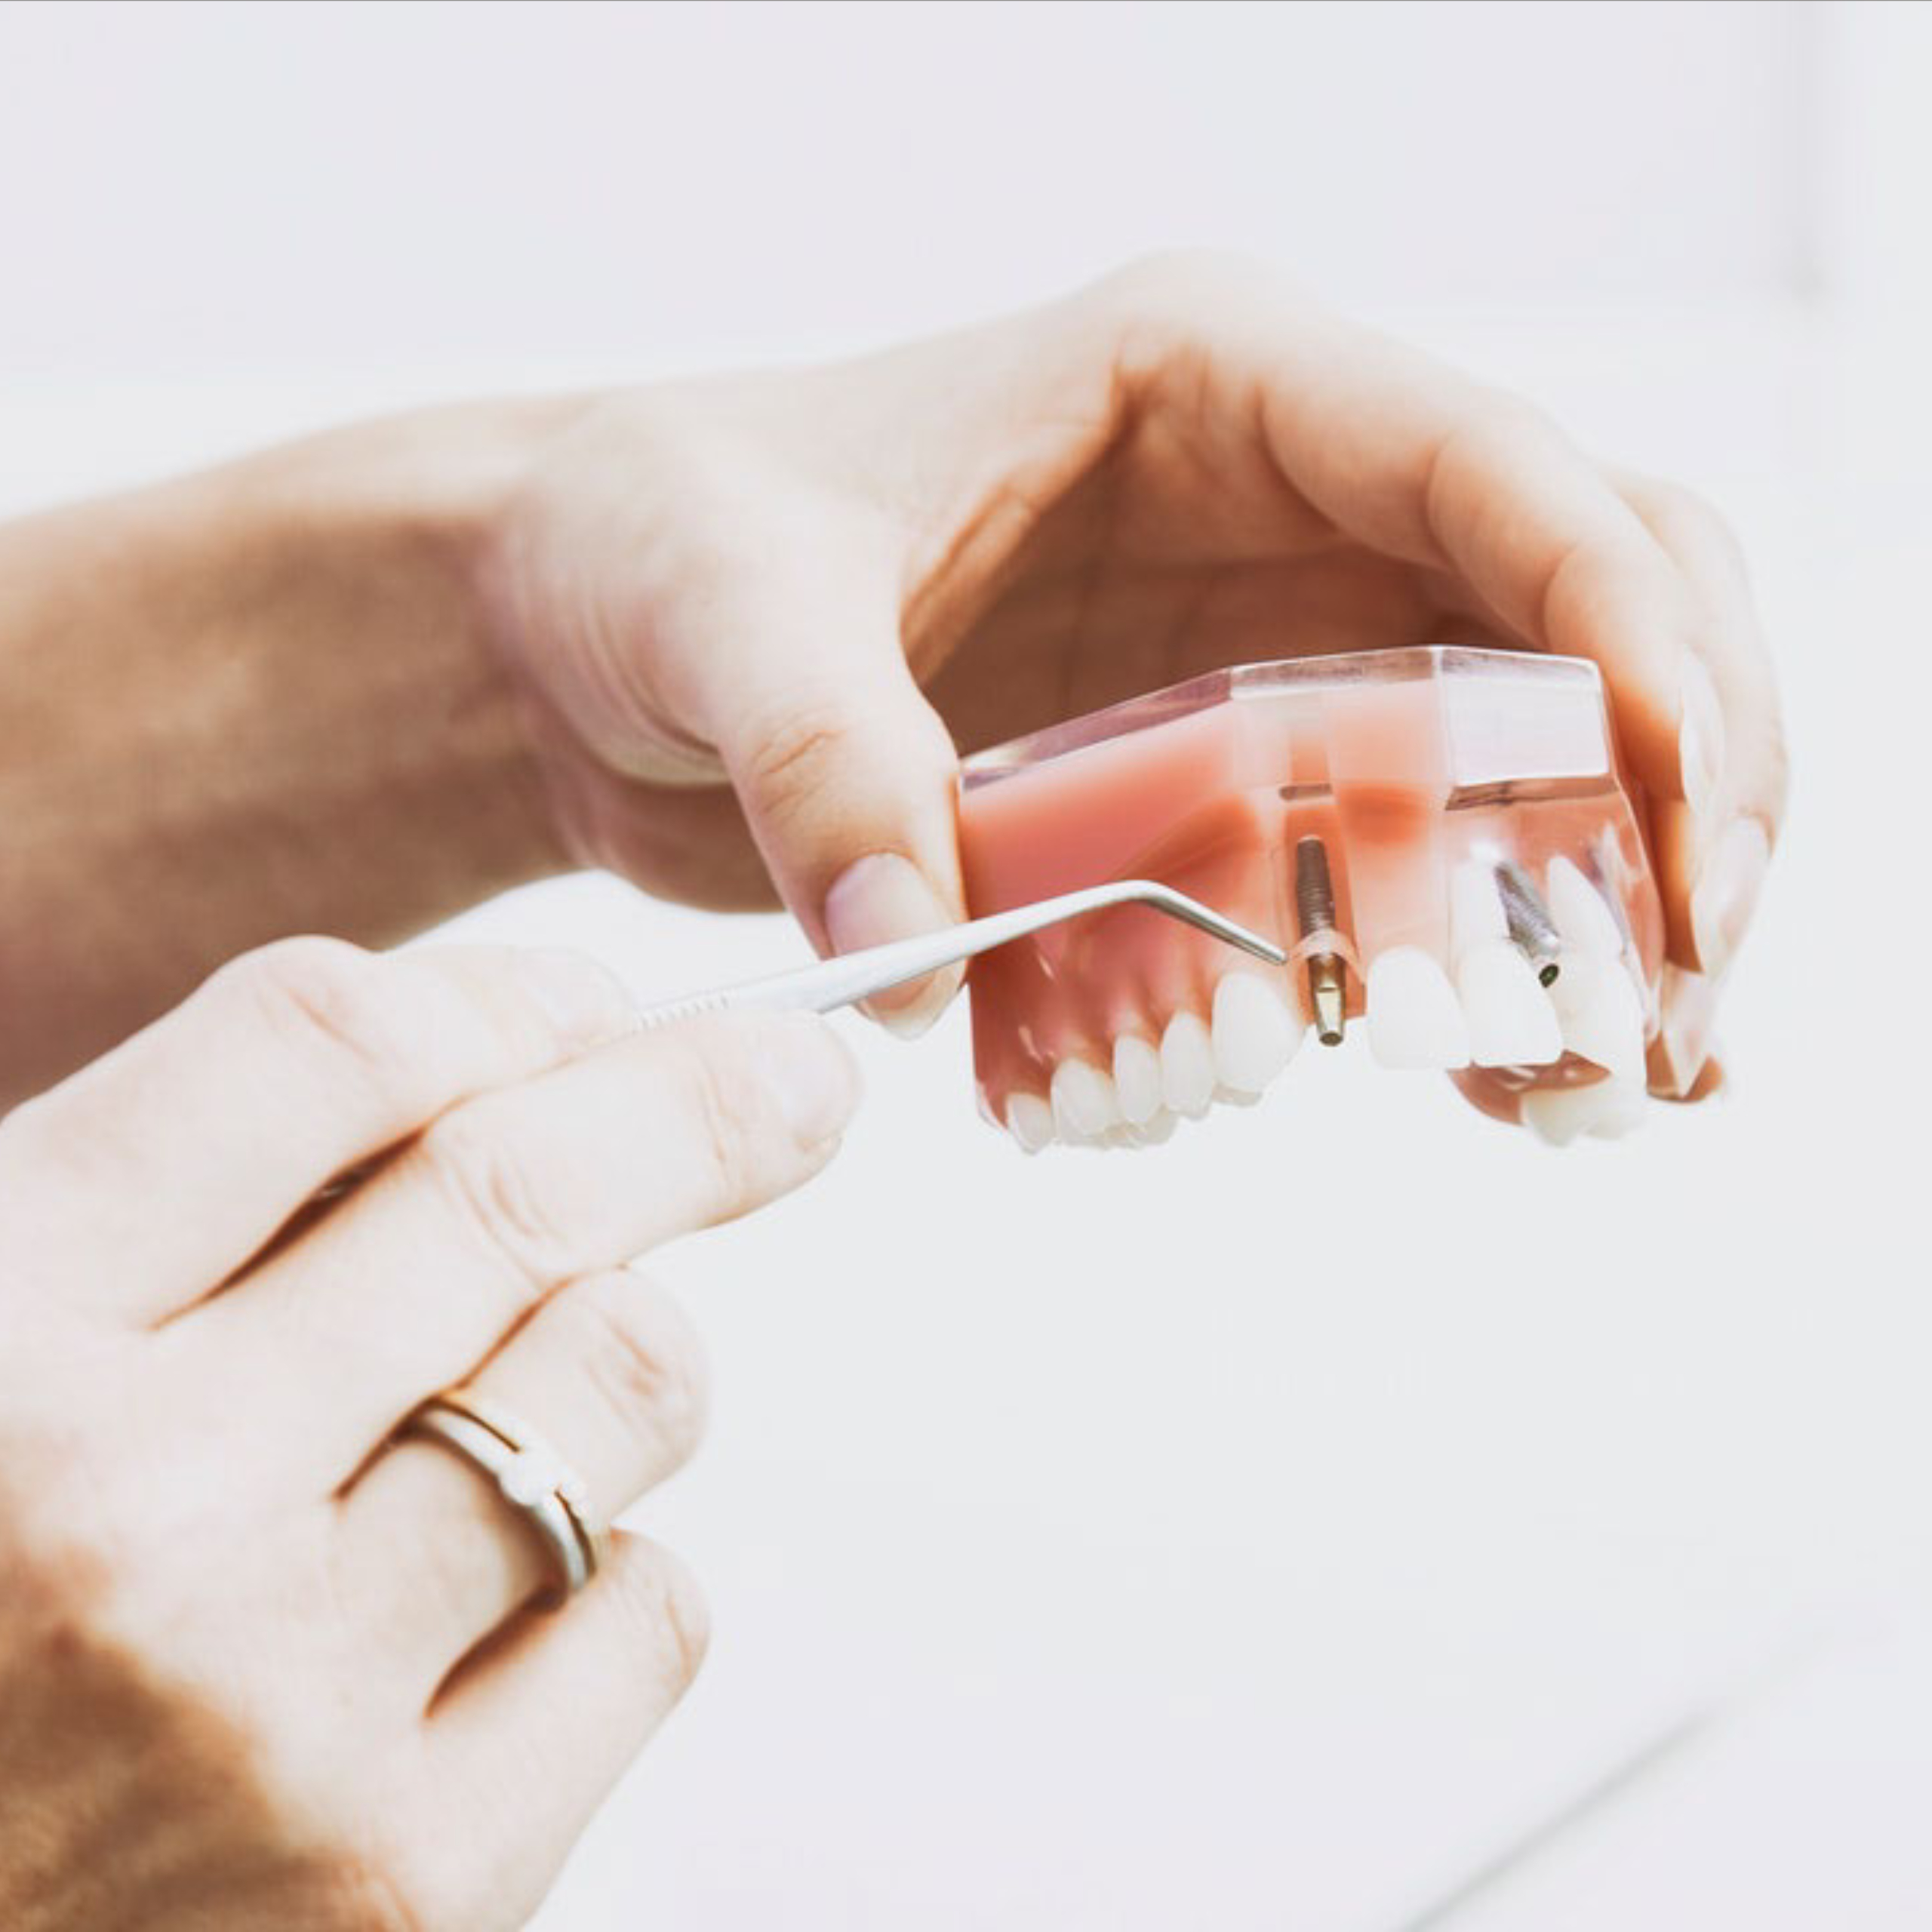 Dentist examining the root of a tooth for a cavity.